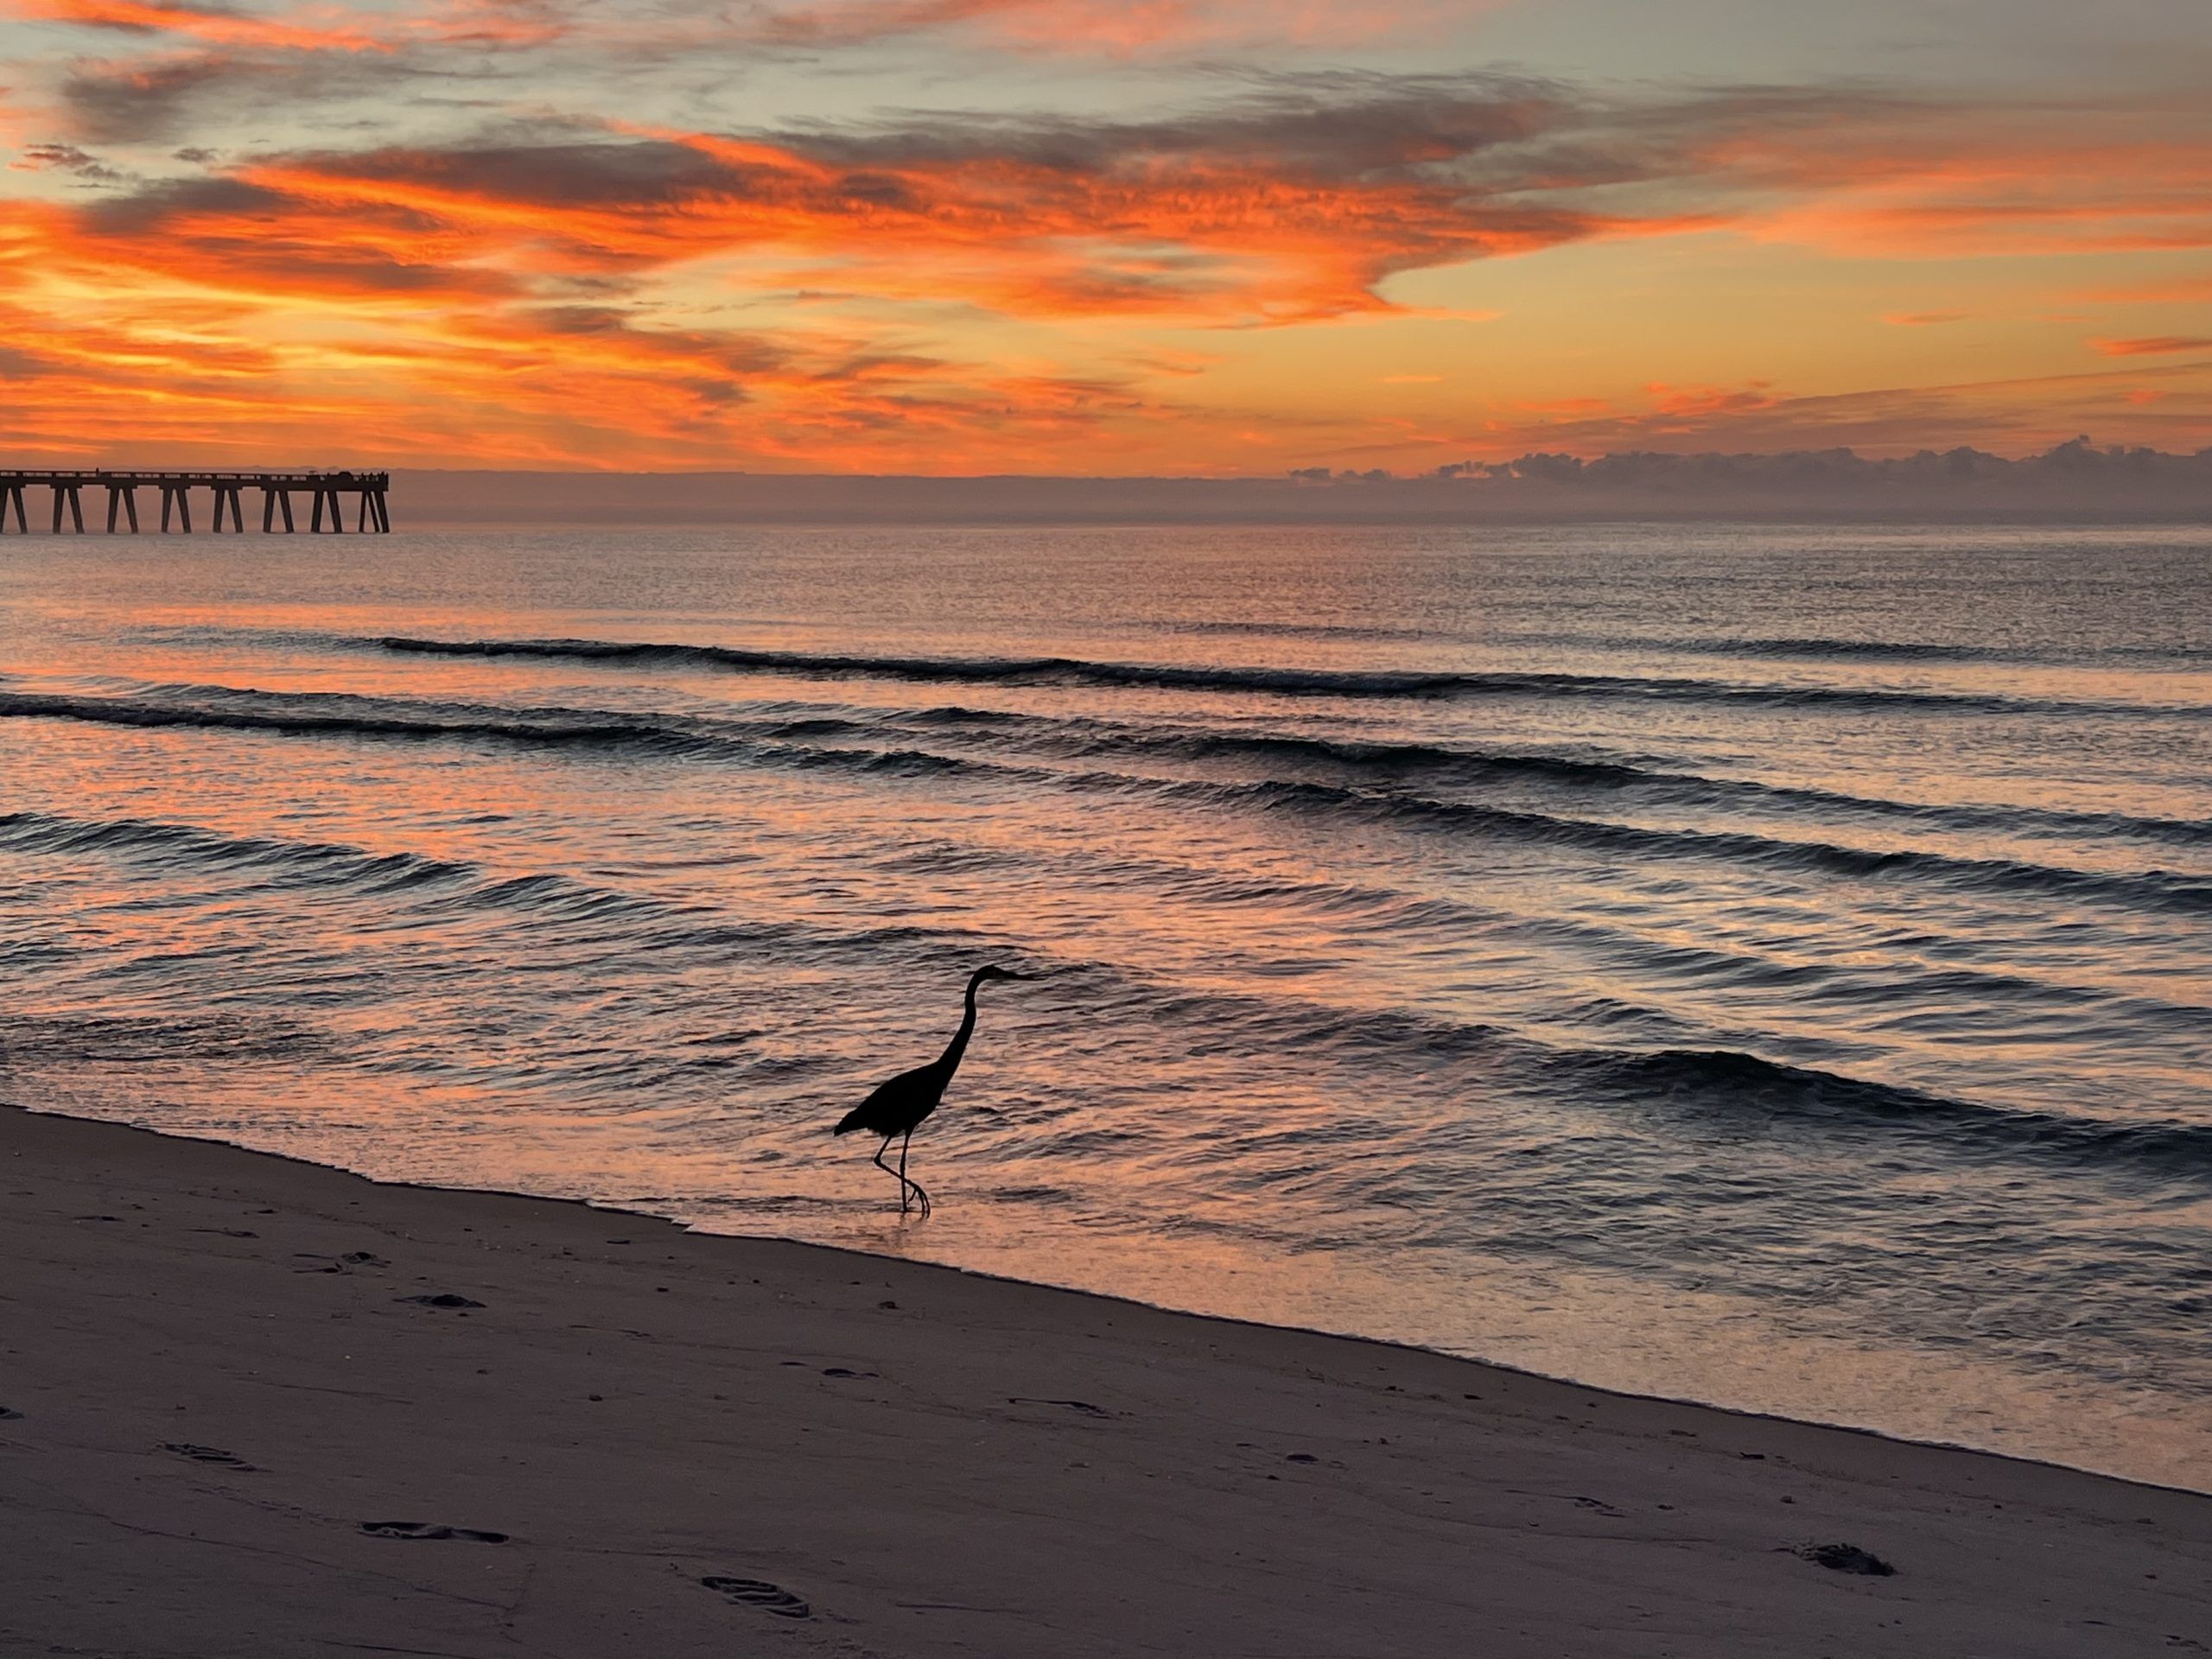 Today's Photo of the Day comes from Julie Shimshack. 

"Checking out the sunrise on Dec. 4th with my crane buddy and the pier in the background," Julie said. 🌅